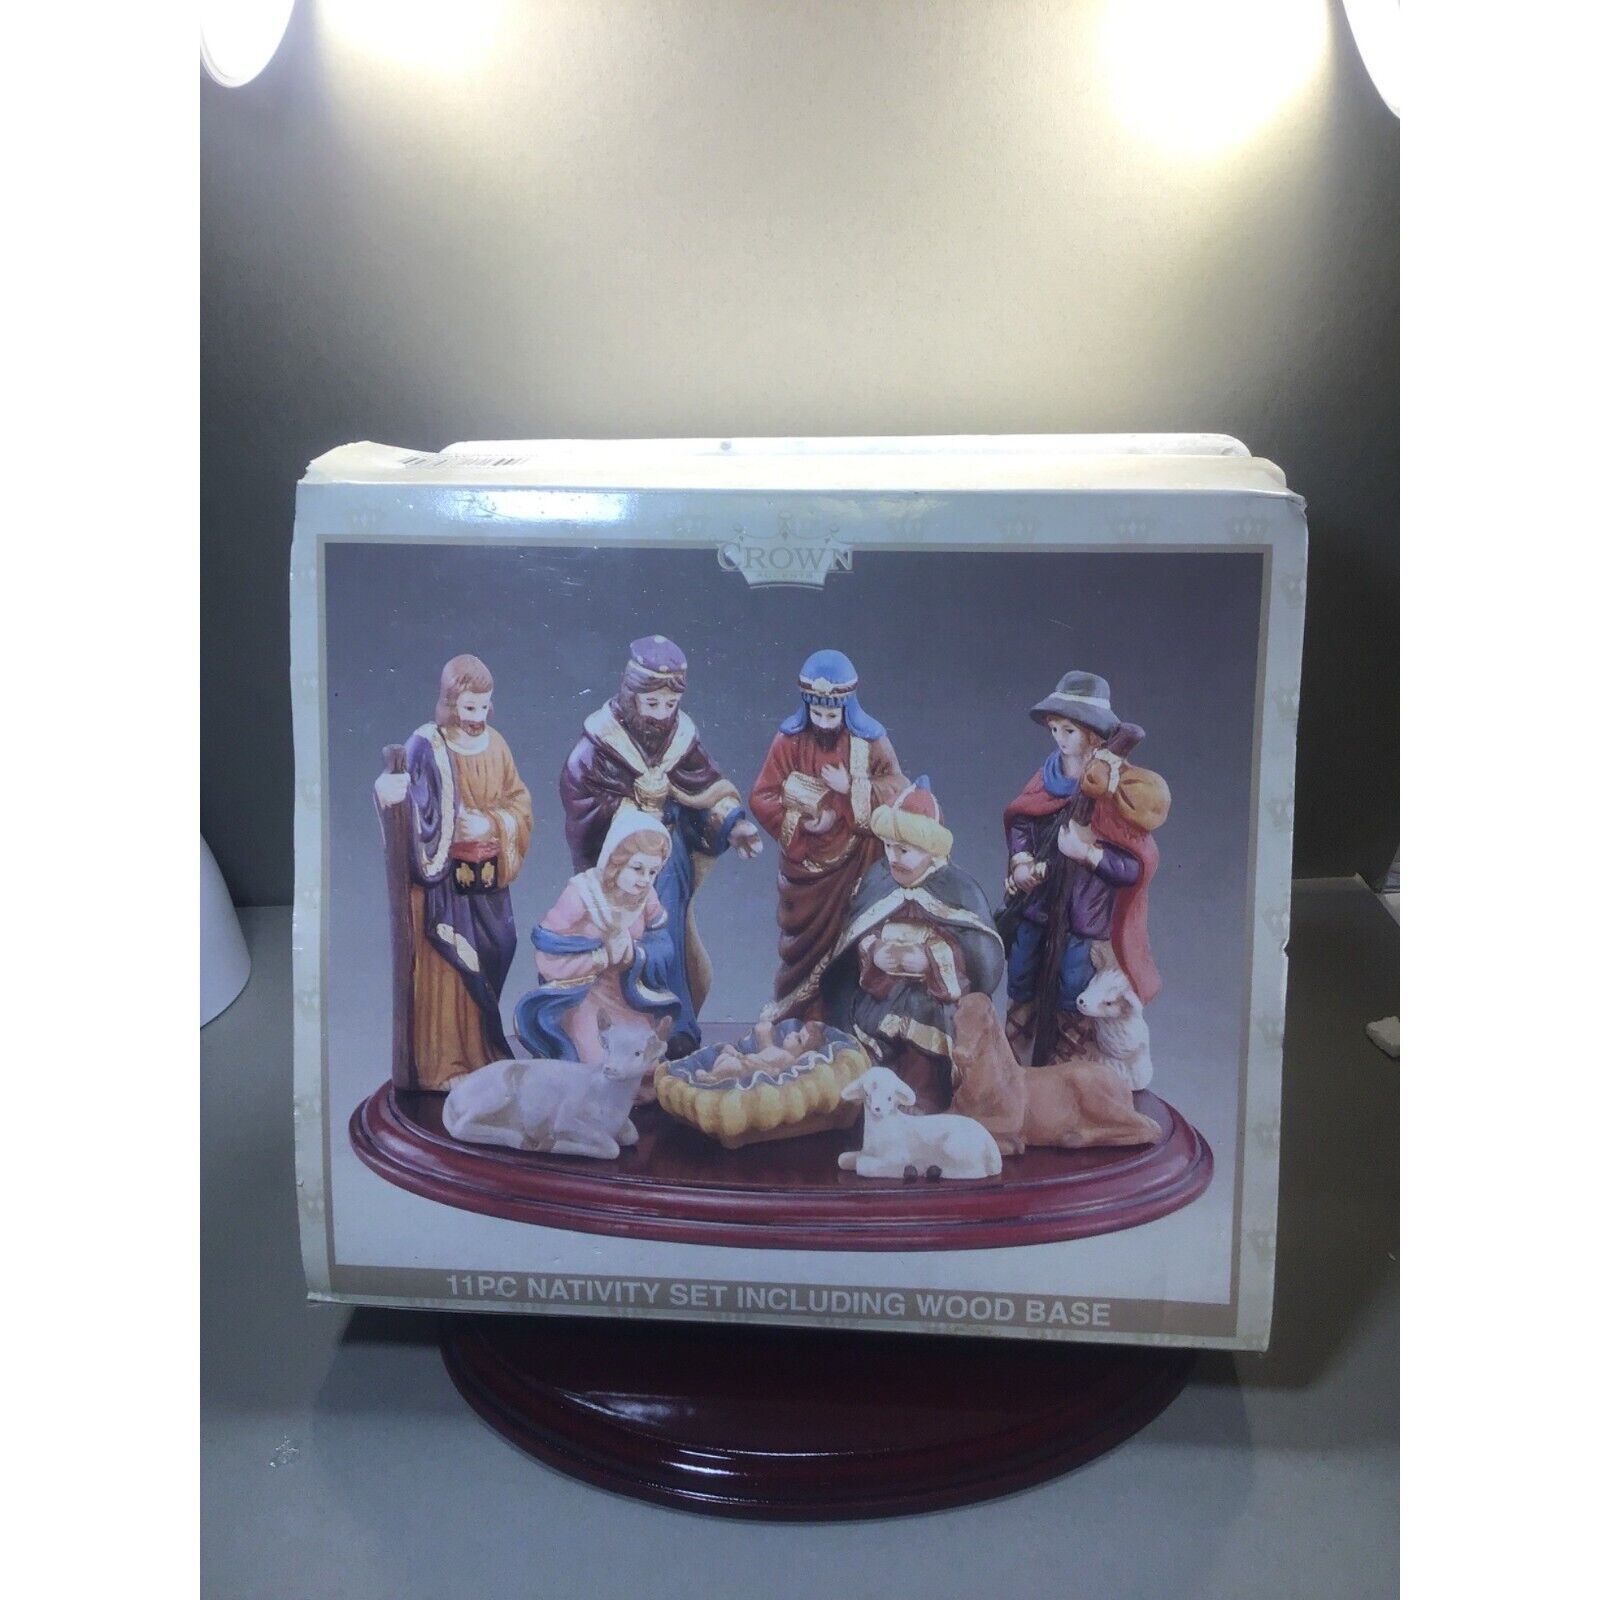 Crown Accent Nativity Figurines w/ Wooden Oval Base 11 pc set